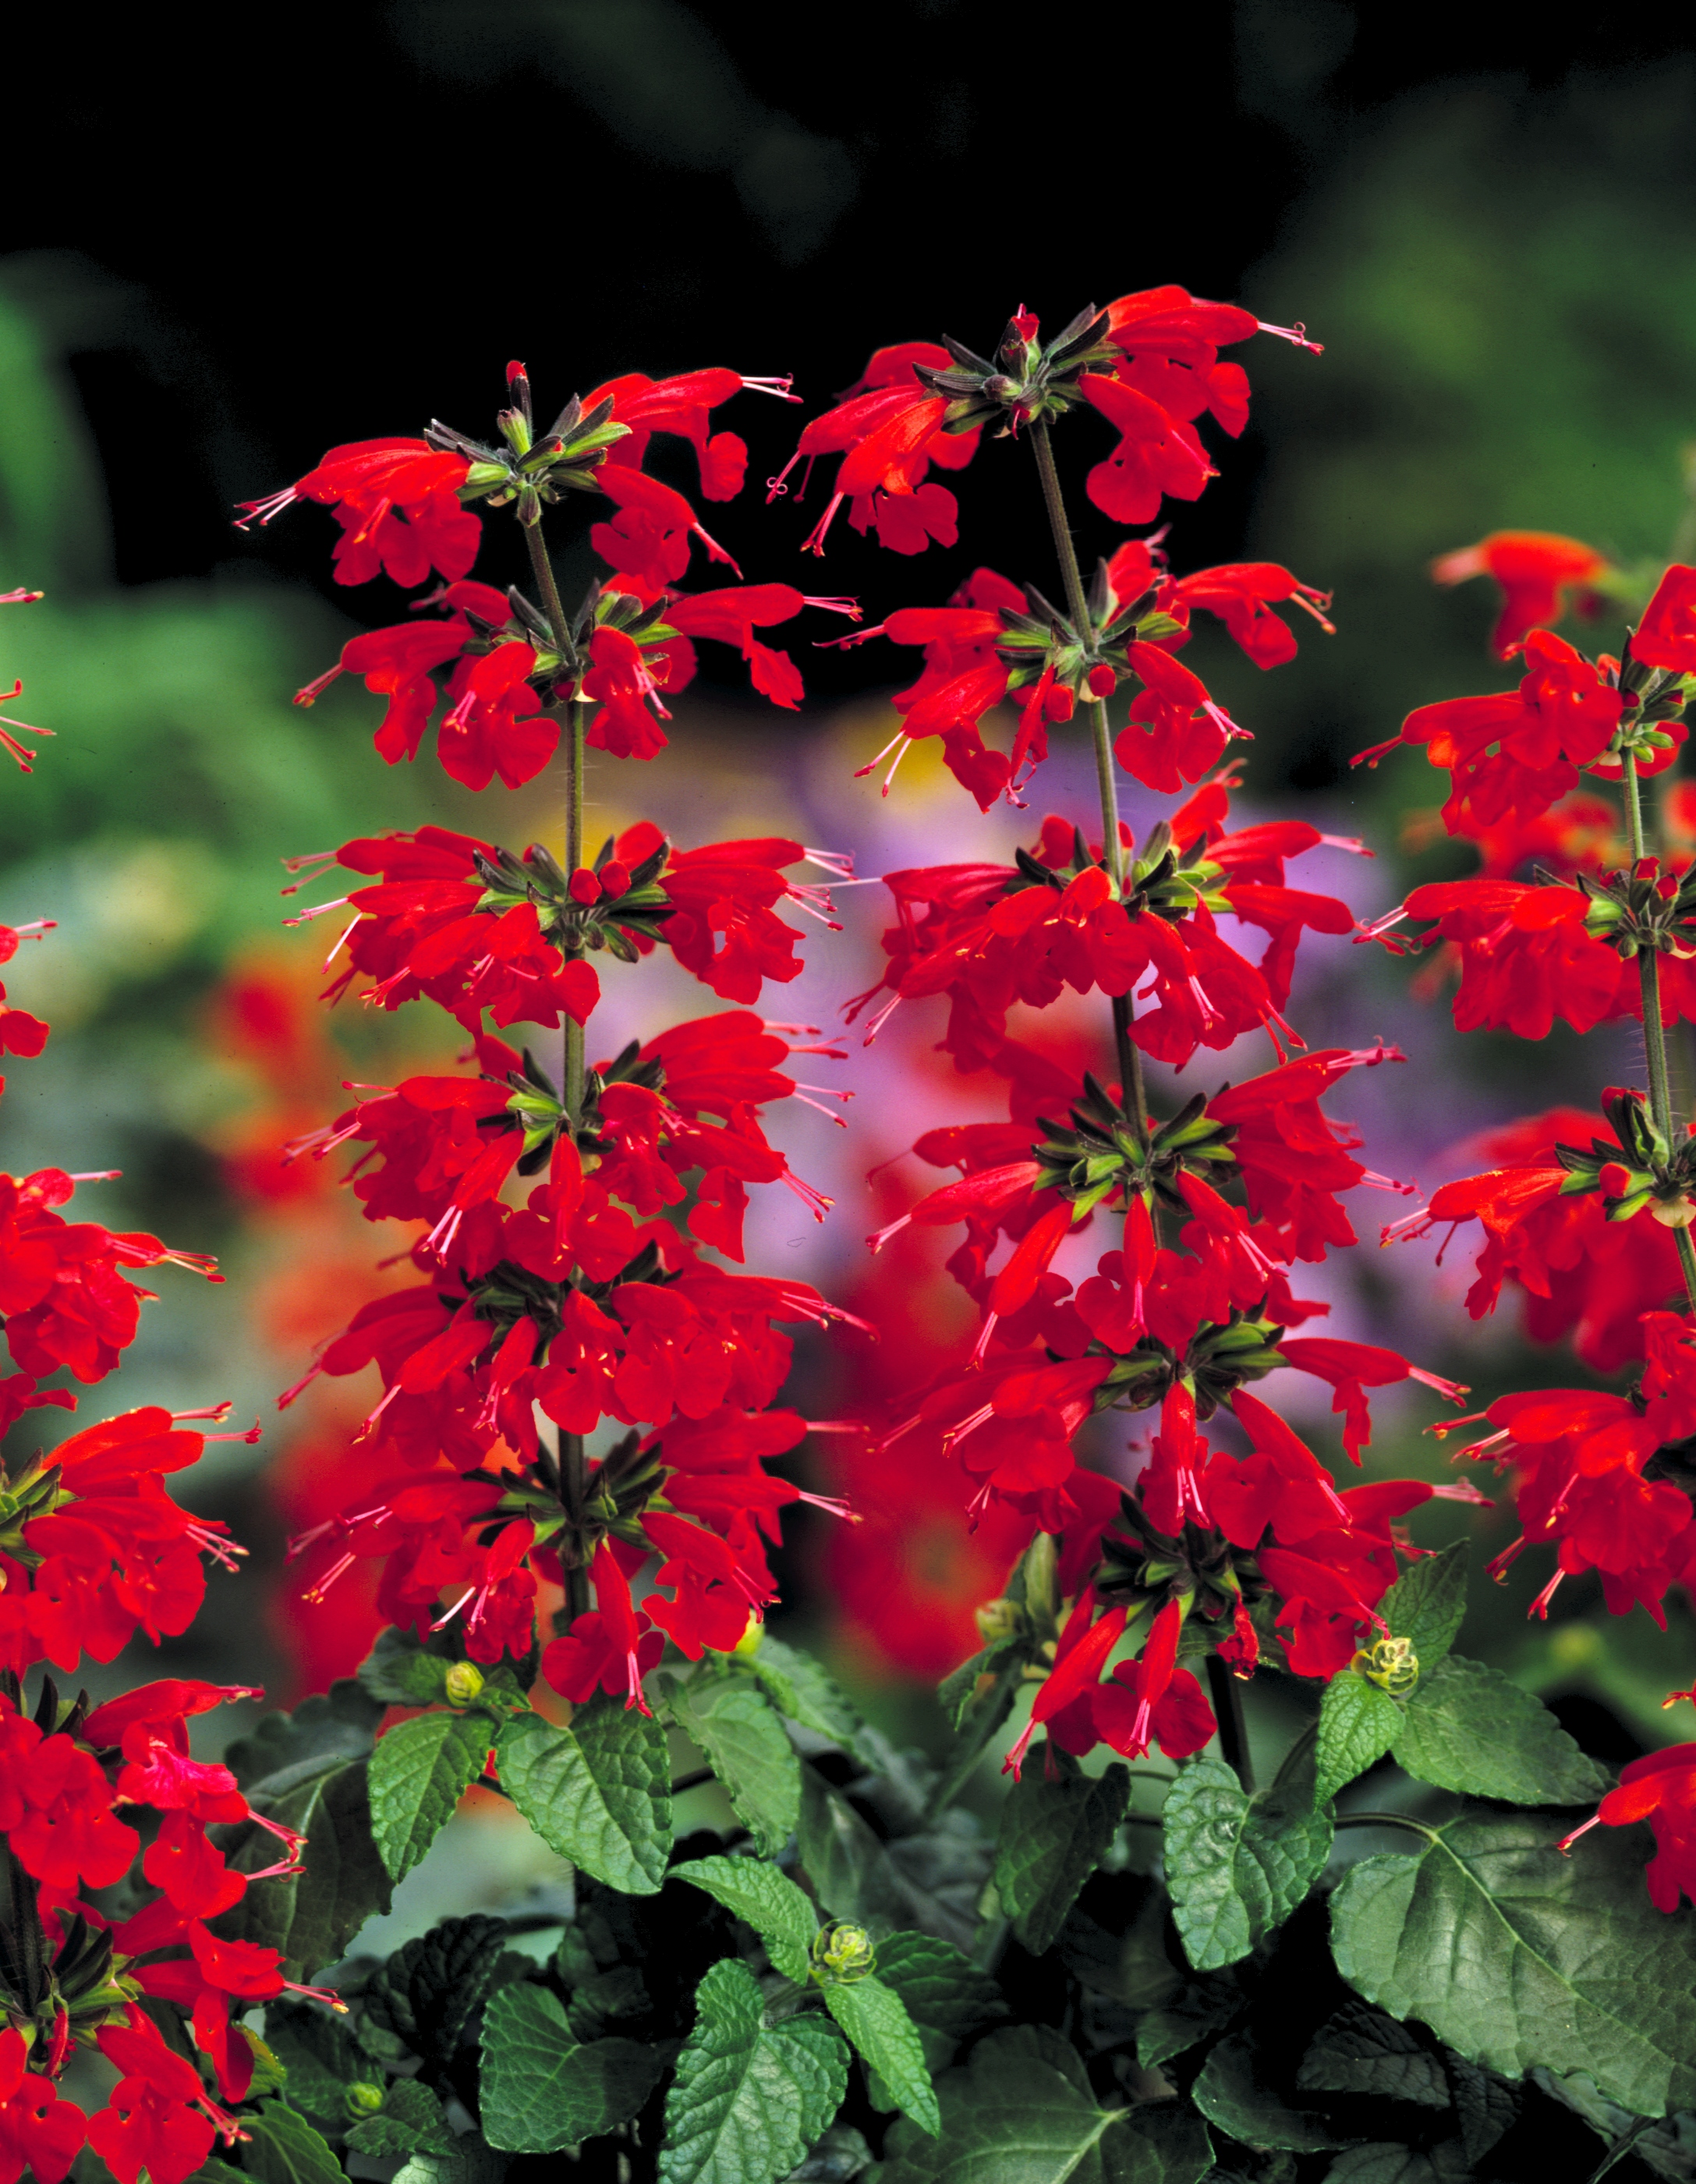 Salvia coccinea Lady in Red